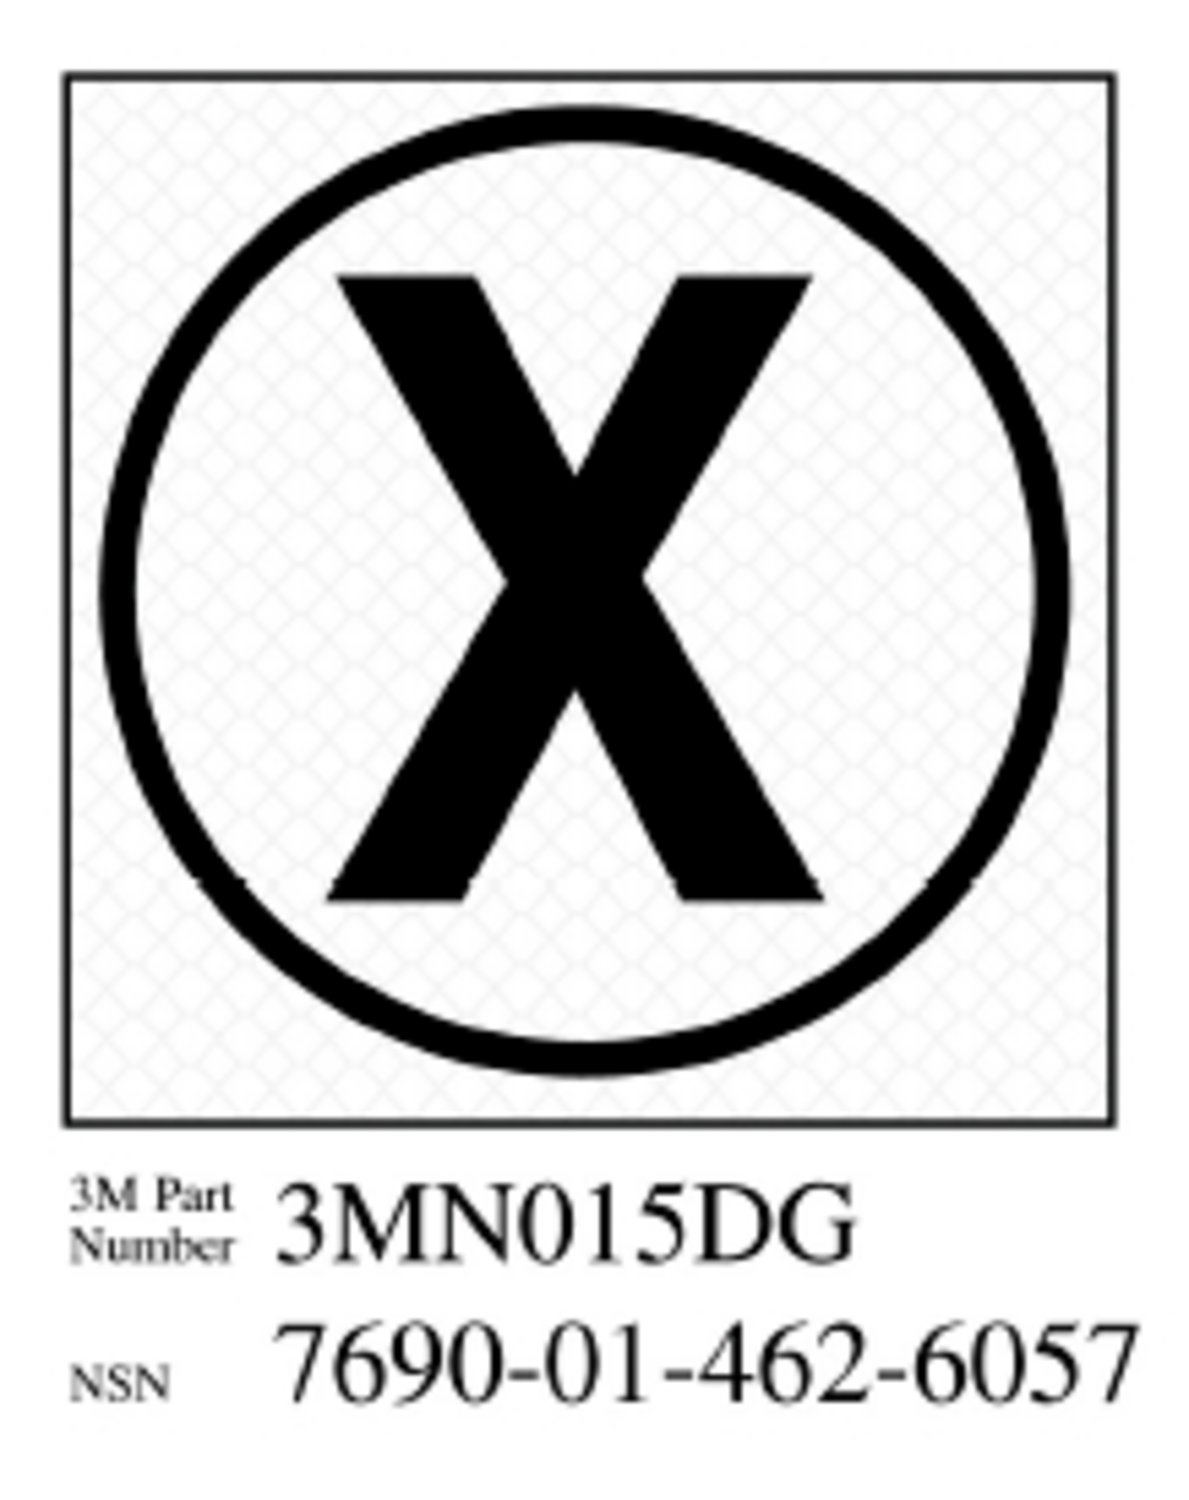 7010388571 - 3M Diamond Grade Damage Control Sign 3MN015DG, "Cir X-Ray", 2 in x 2 in, 10/Package